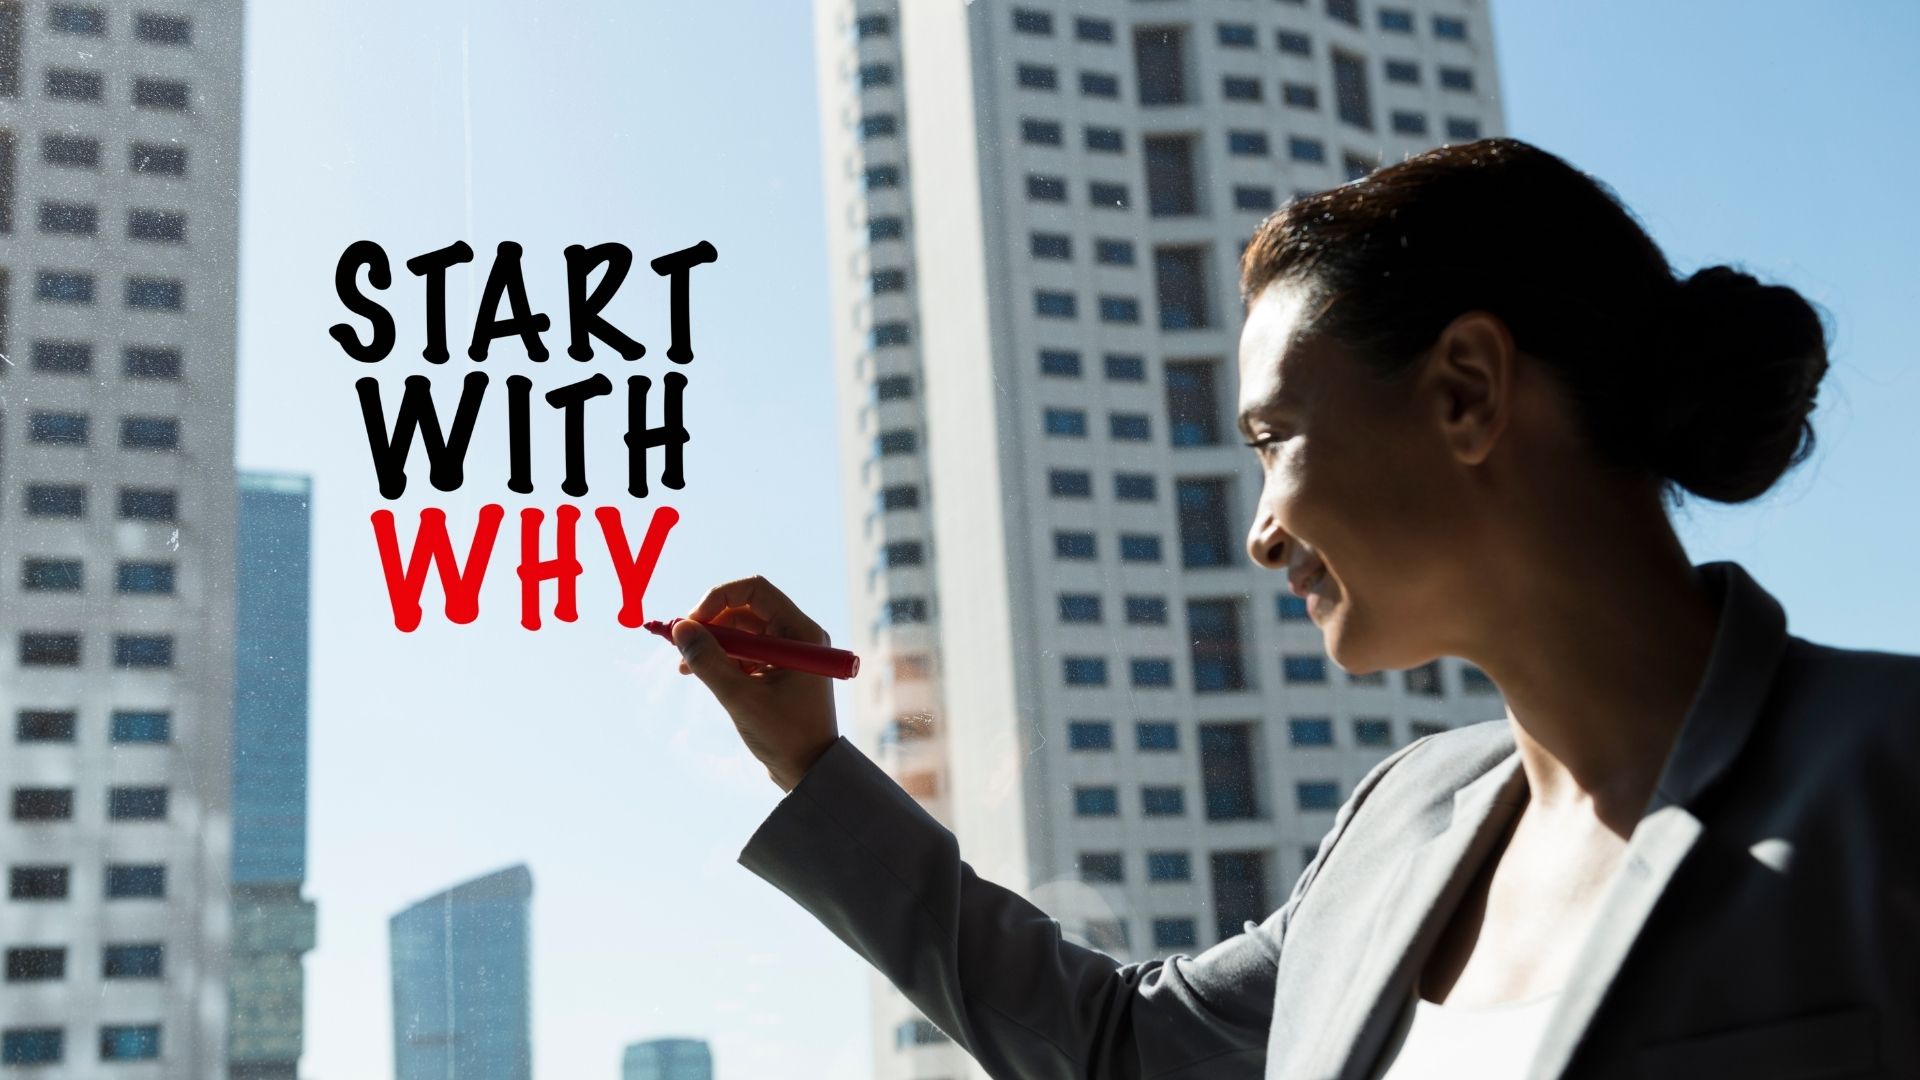 finding your business' "why"